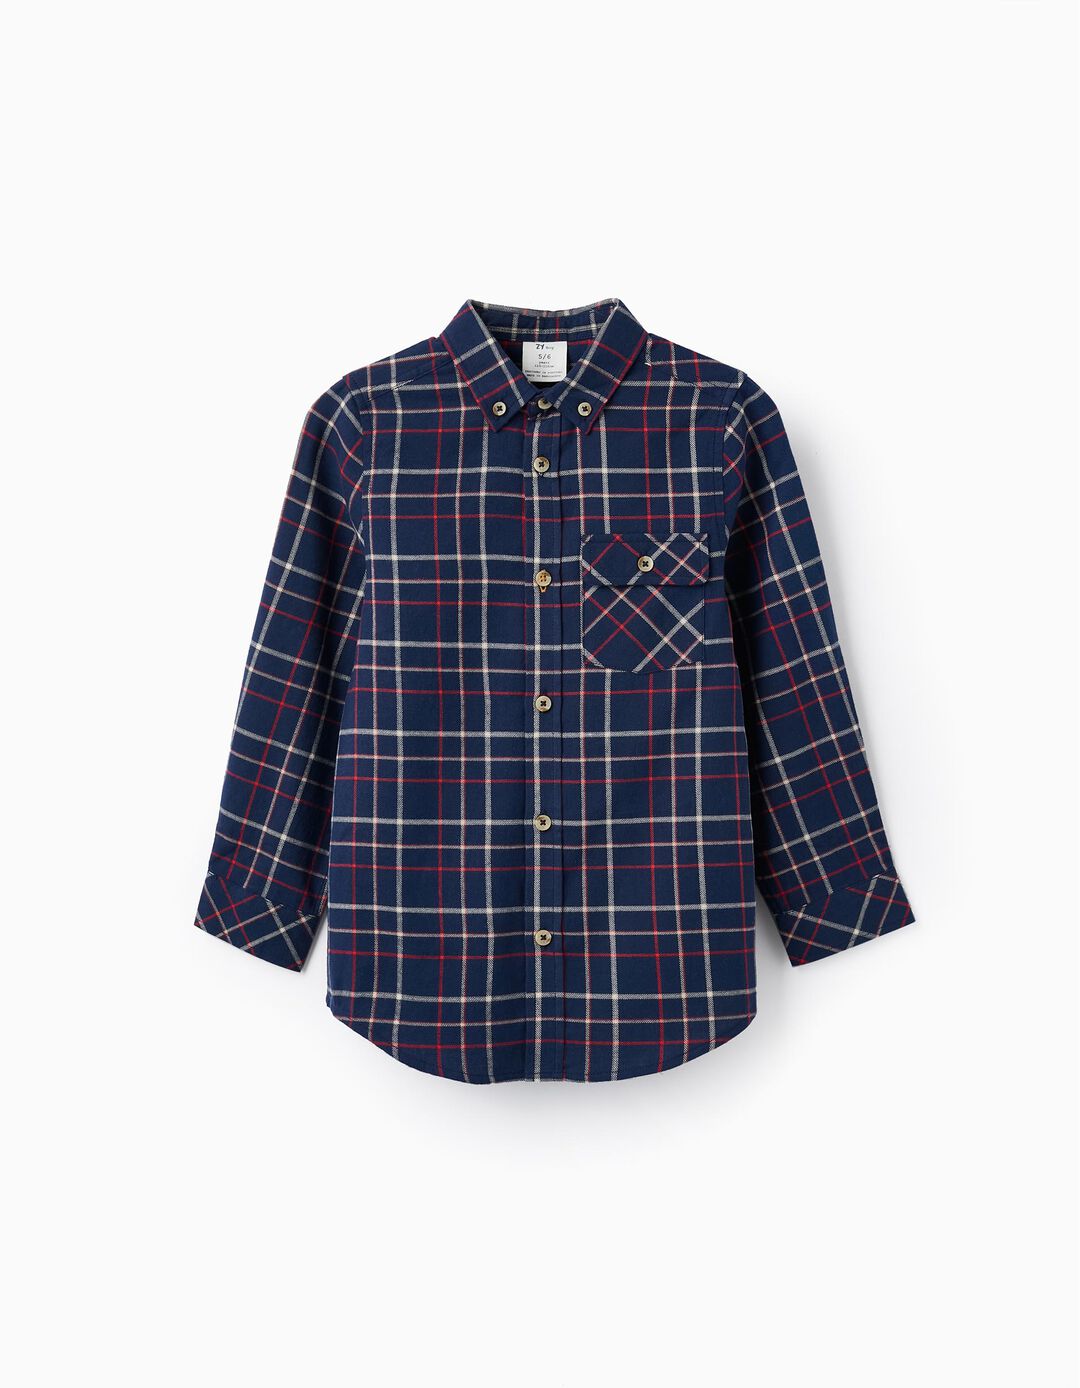 Checked Cotton Shirt for Boys, Dark Blue/Red/White